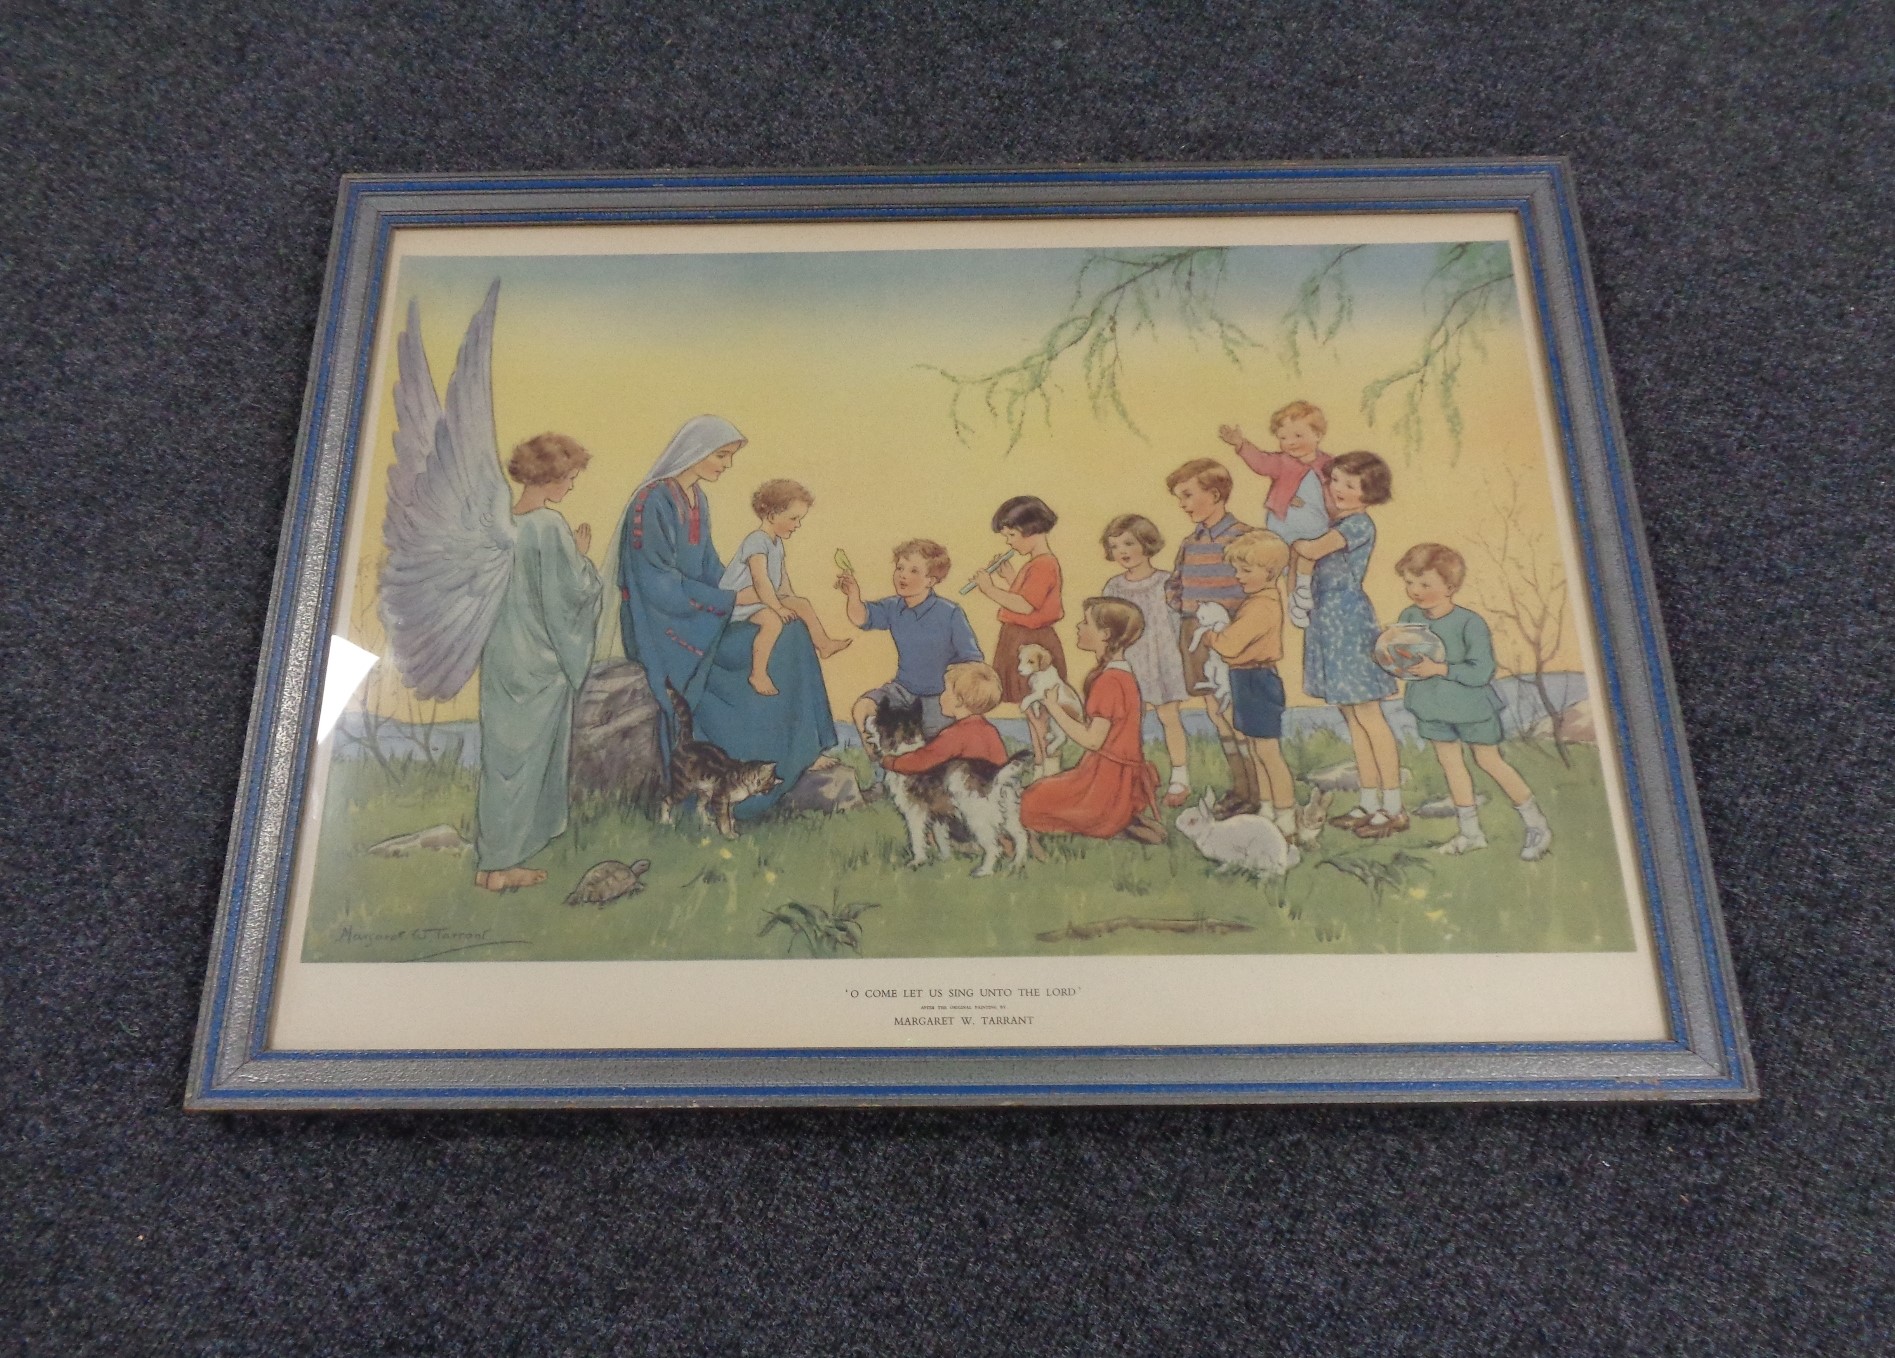 A Margaret W. Tarrant colour lithographic print, O Come Let Us Sing Unto The Lord.